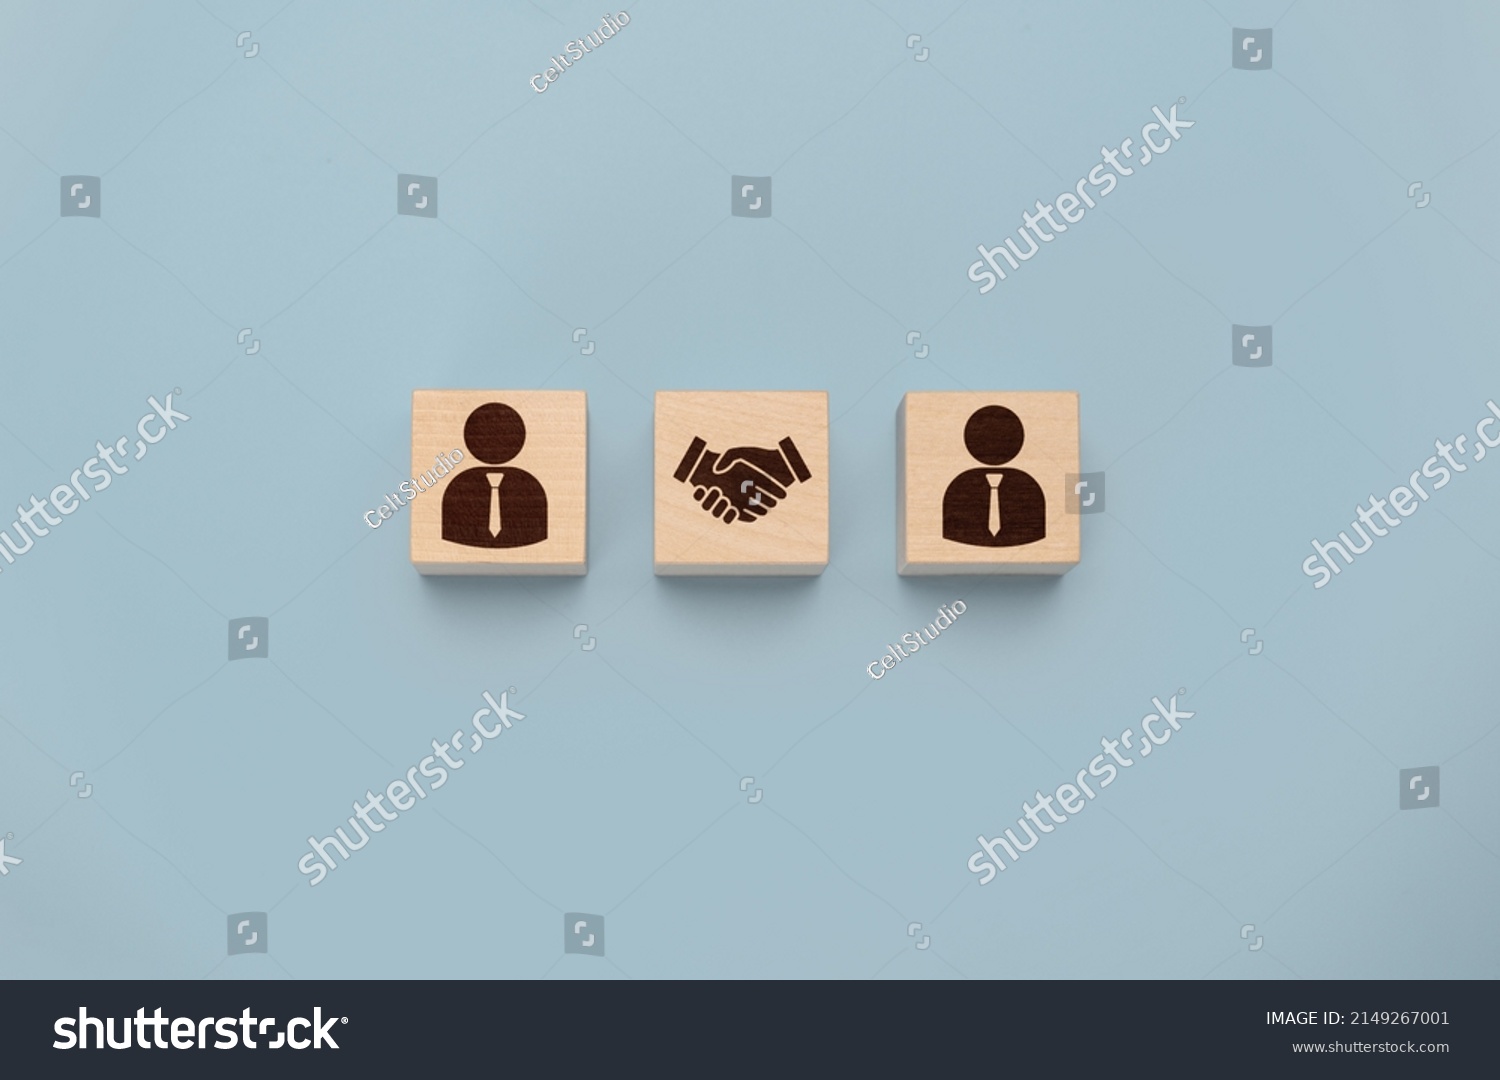 business contract. Hand putting hand shaking which print screen on wooden cube block in front of human icon for business deal and agreement concept. Teamwork process of partner and best relationship. #2149267001